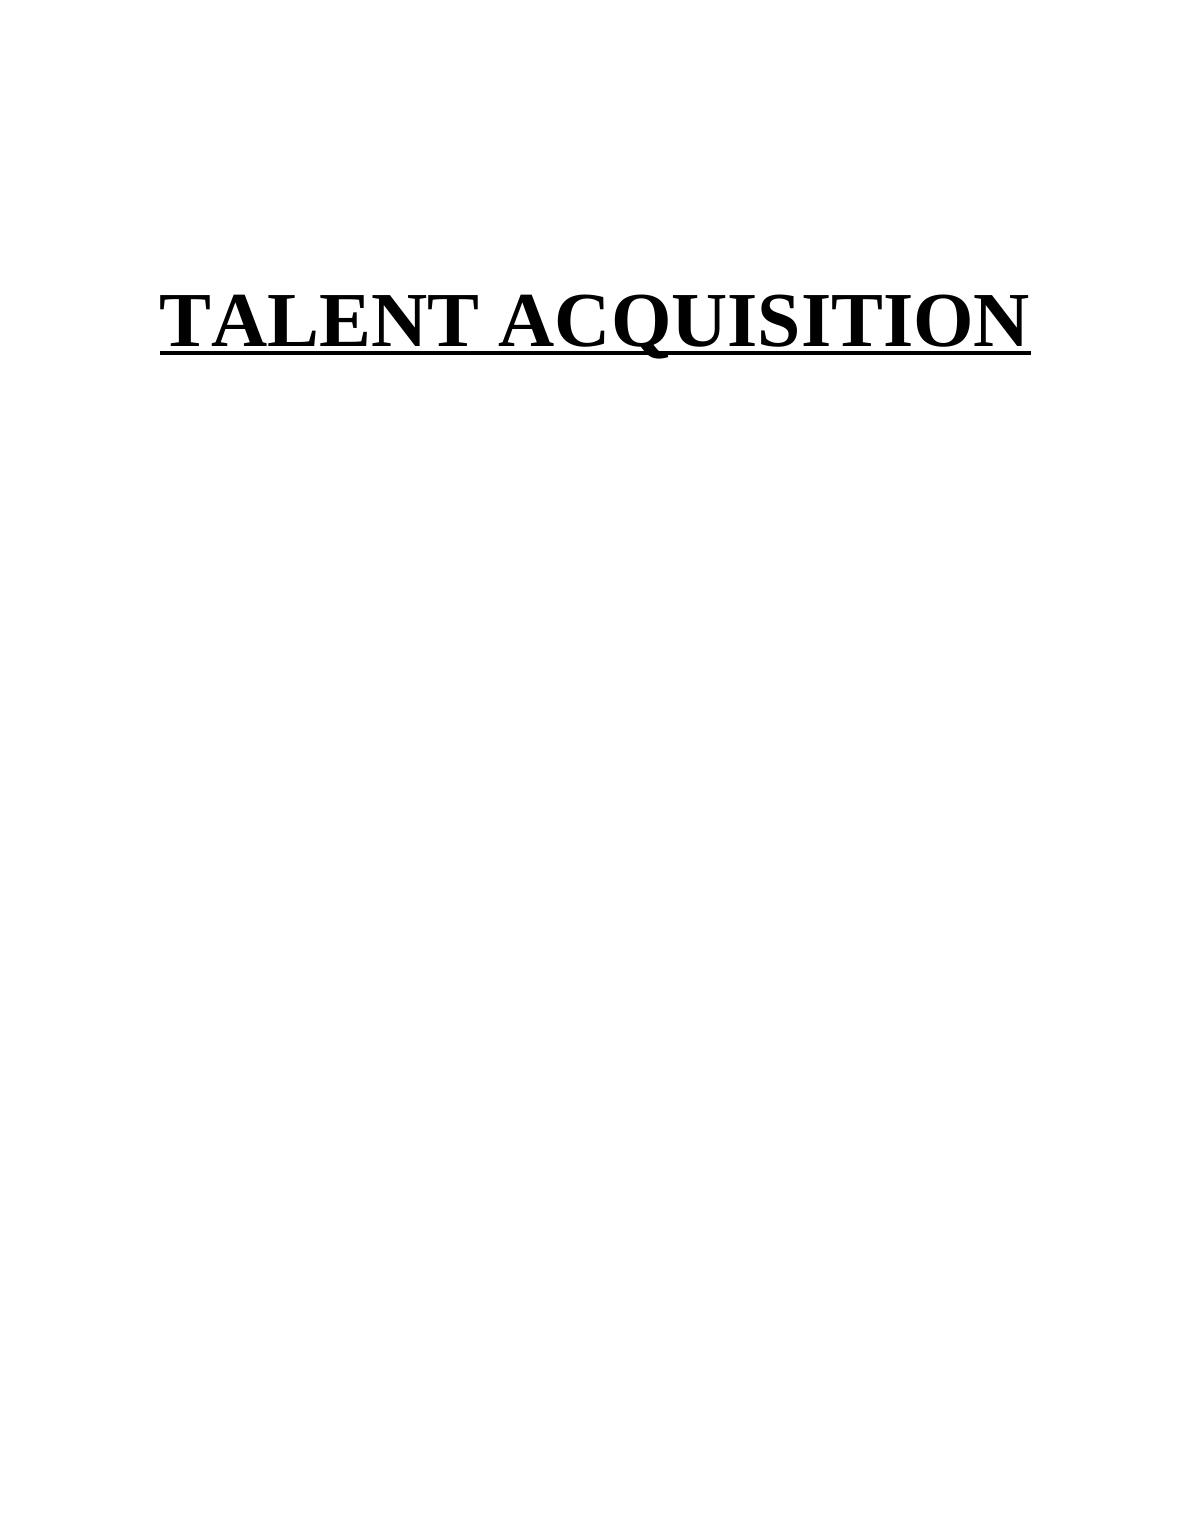 Talent Management and Acquisition Assignment_1